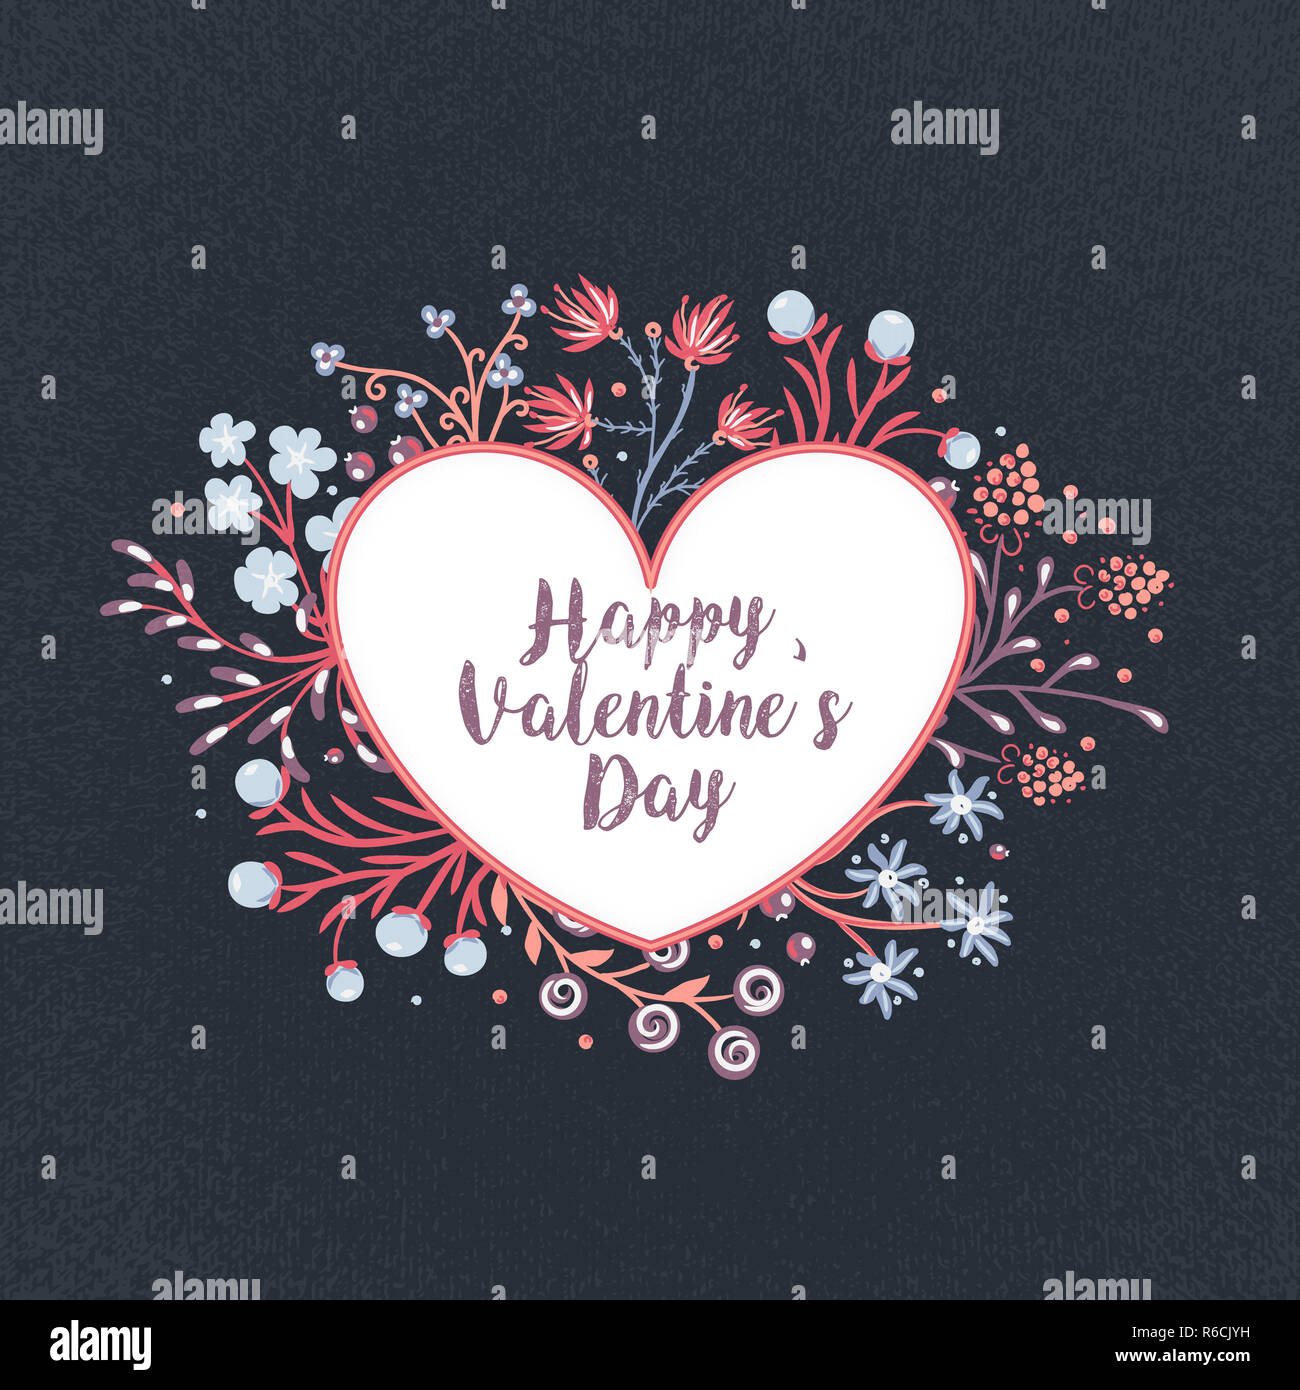 Happy Valentine's Day. Hand drawn colorful flowers around heart. Floral frame. Romance. Holiday in February Stock Photo